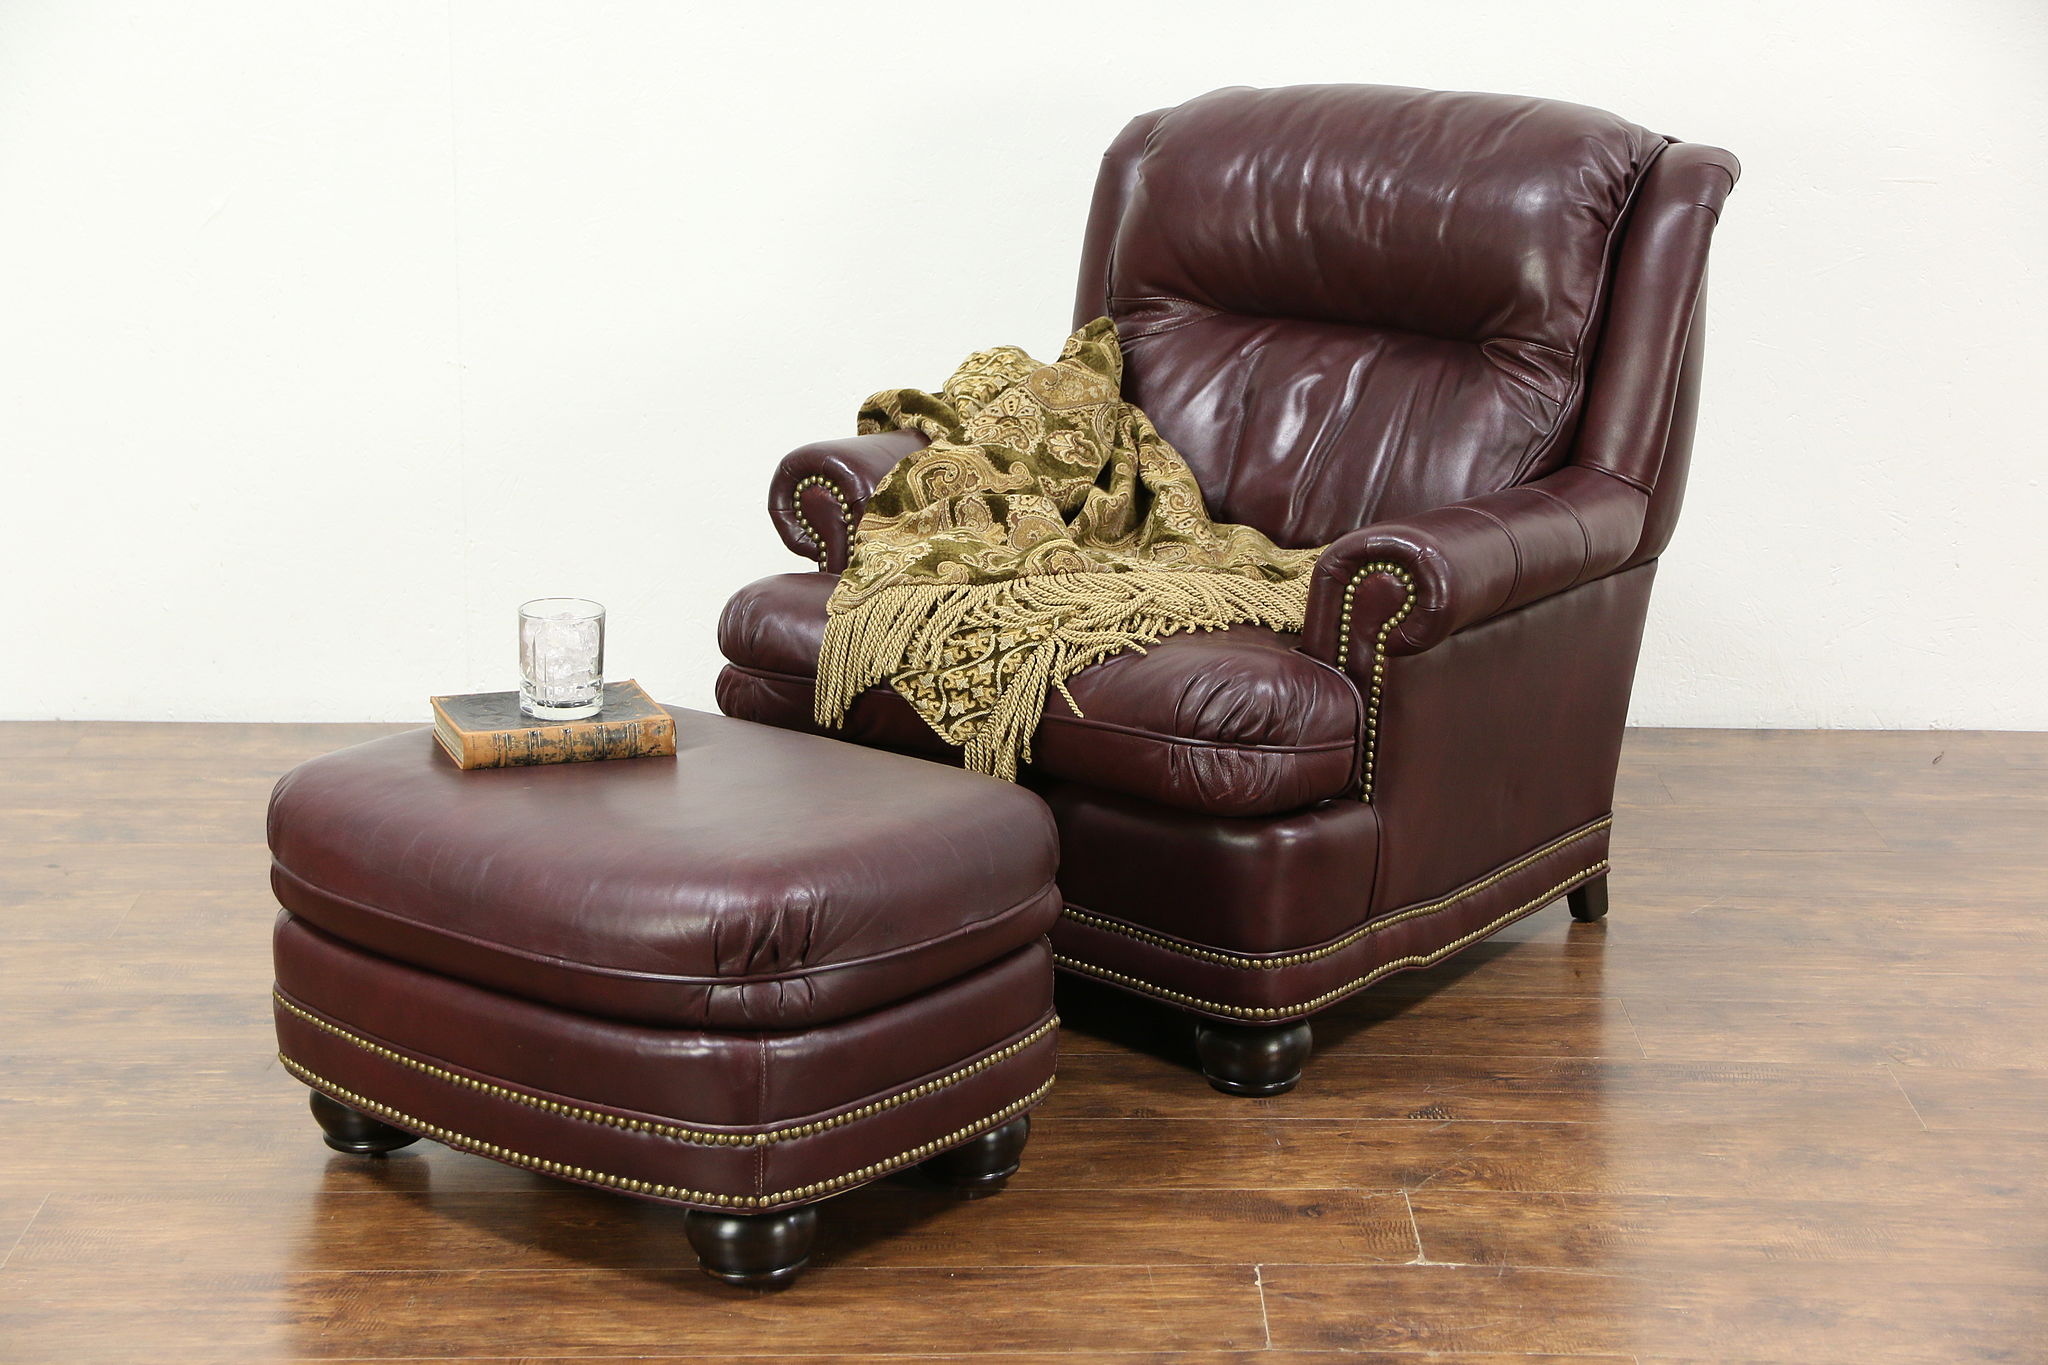 Ottoman Set Signed Leather Master, Leather Club Chair Ottoman